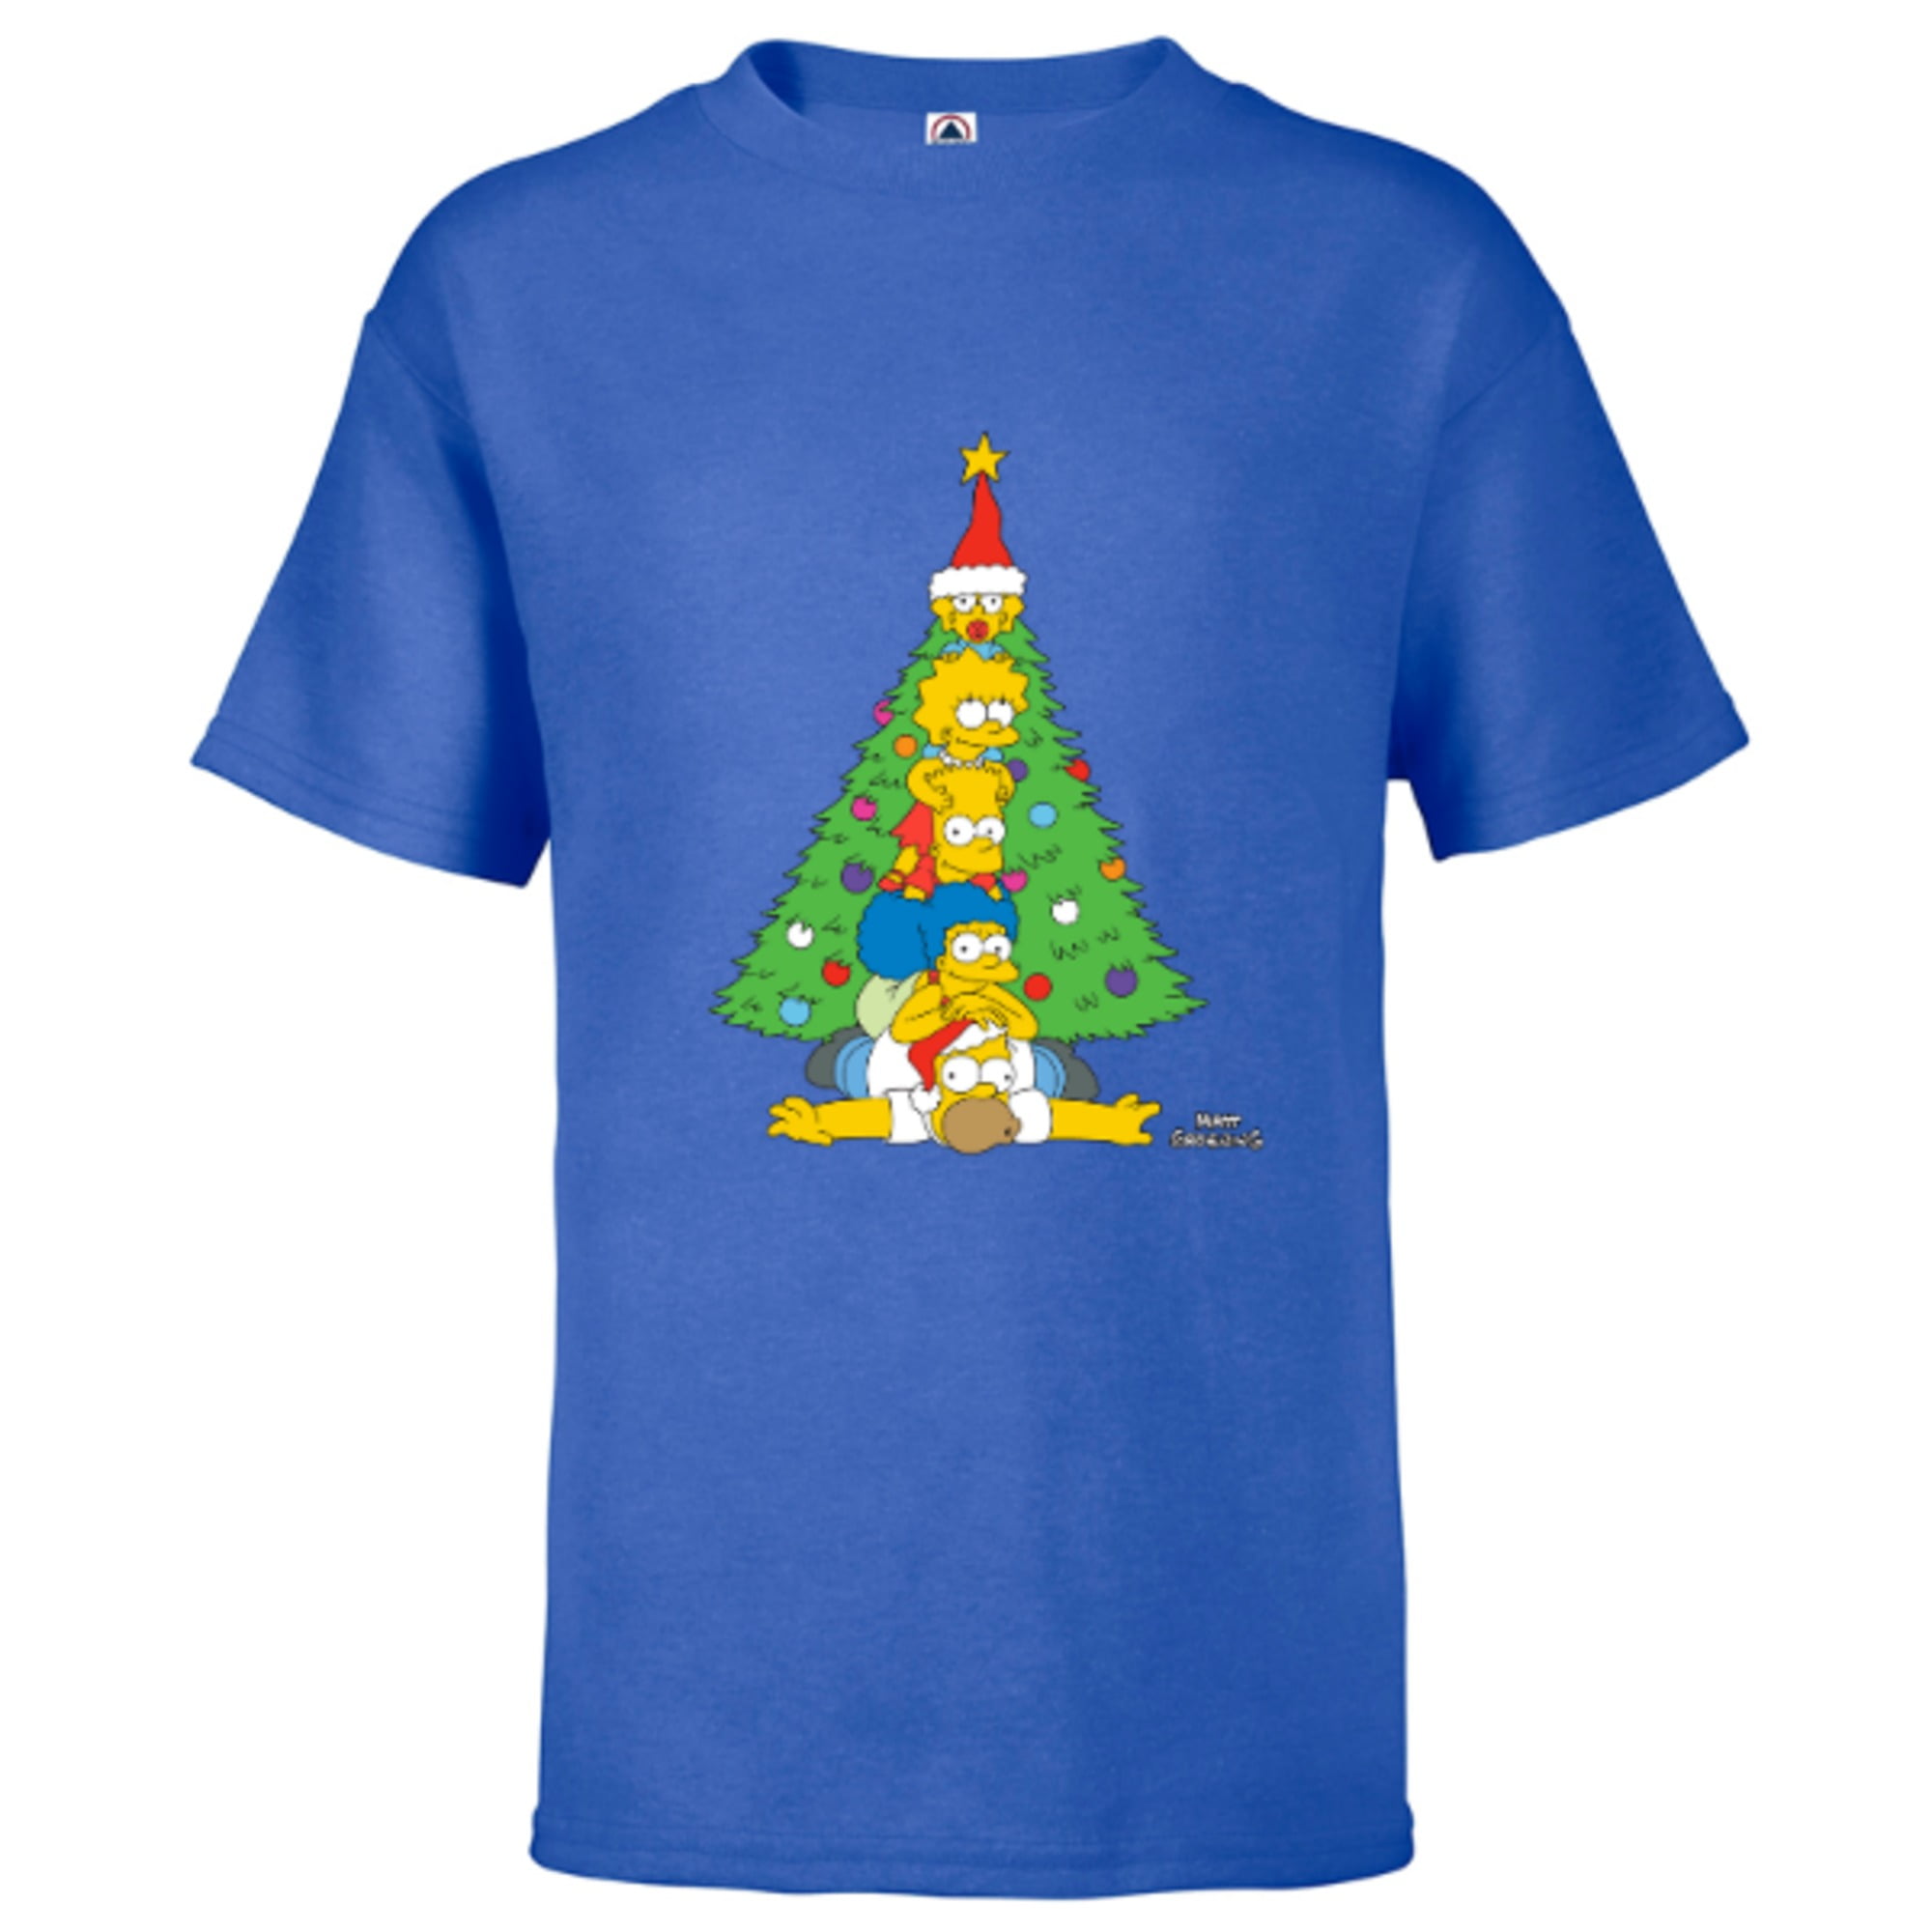 – The for - Customized-Red T-Shirt Short Family Tree Kids Sleeve Holiday Simpsons Christmas